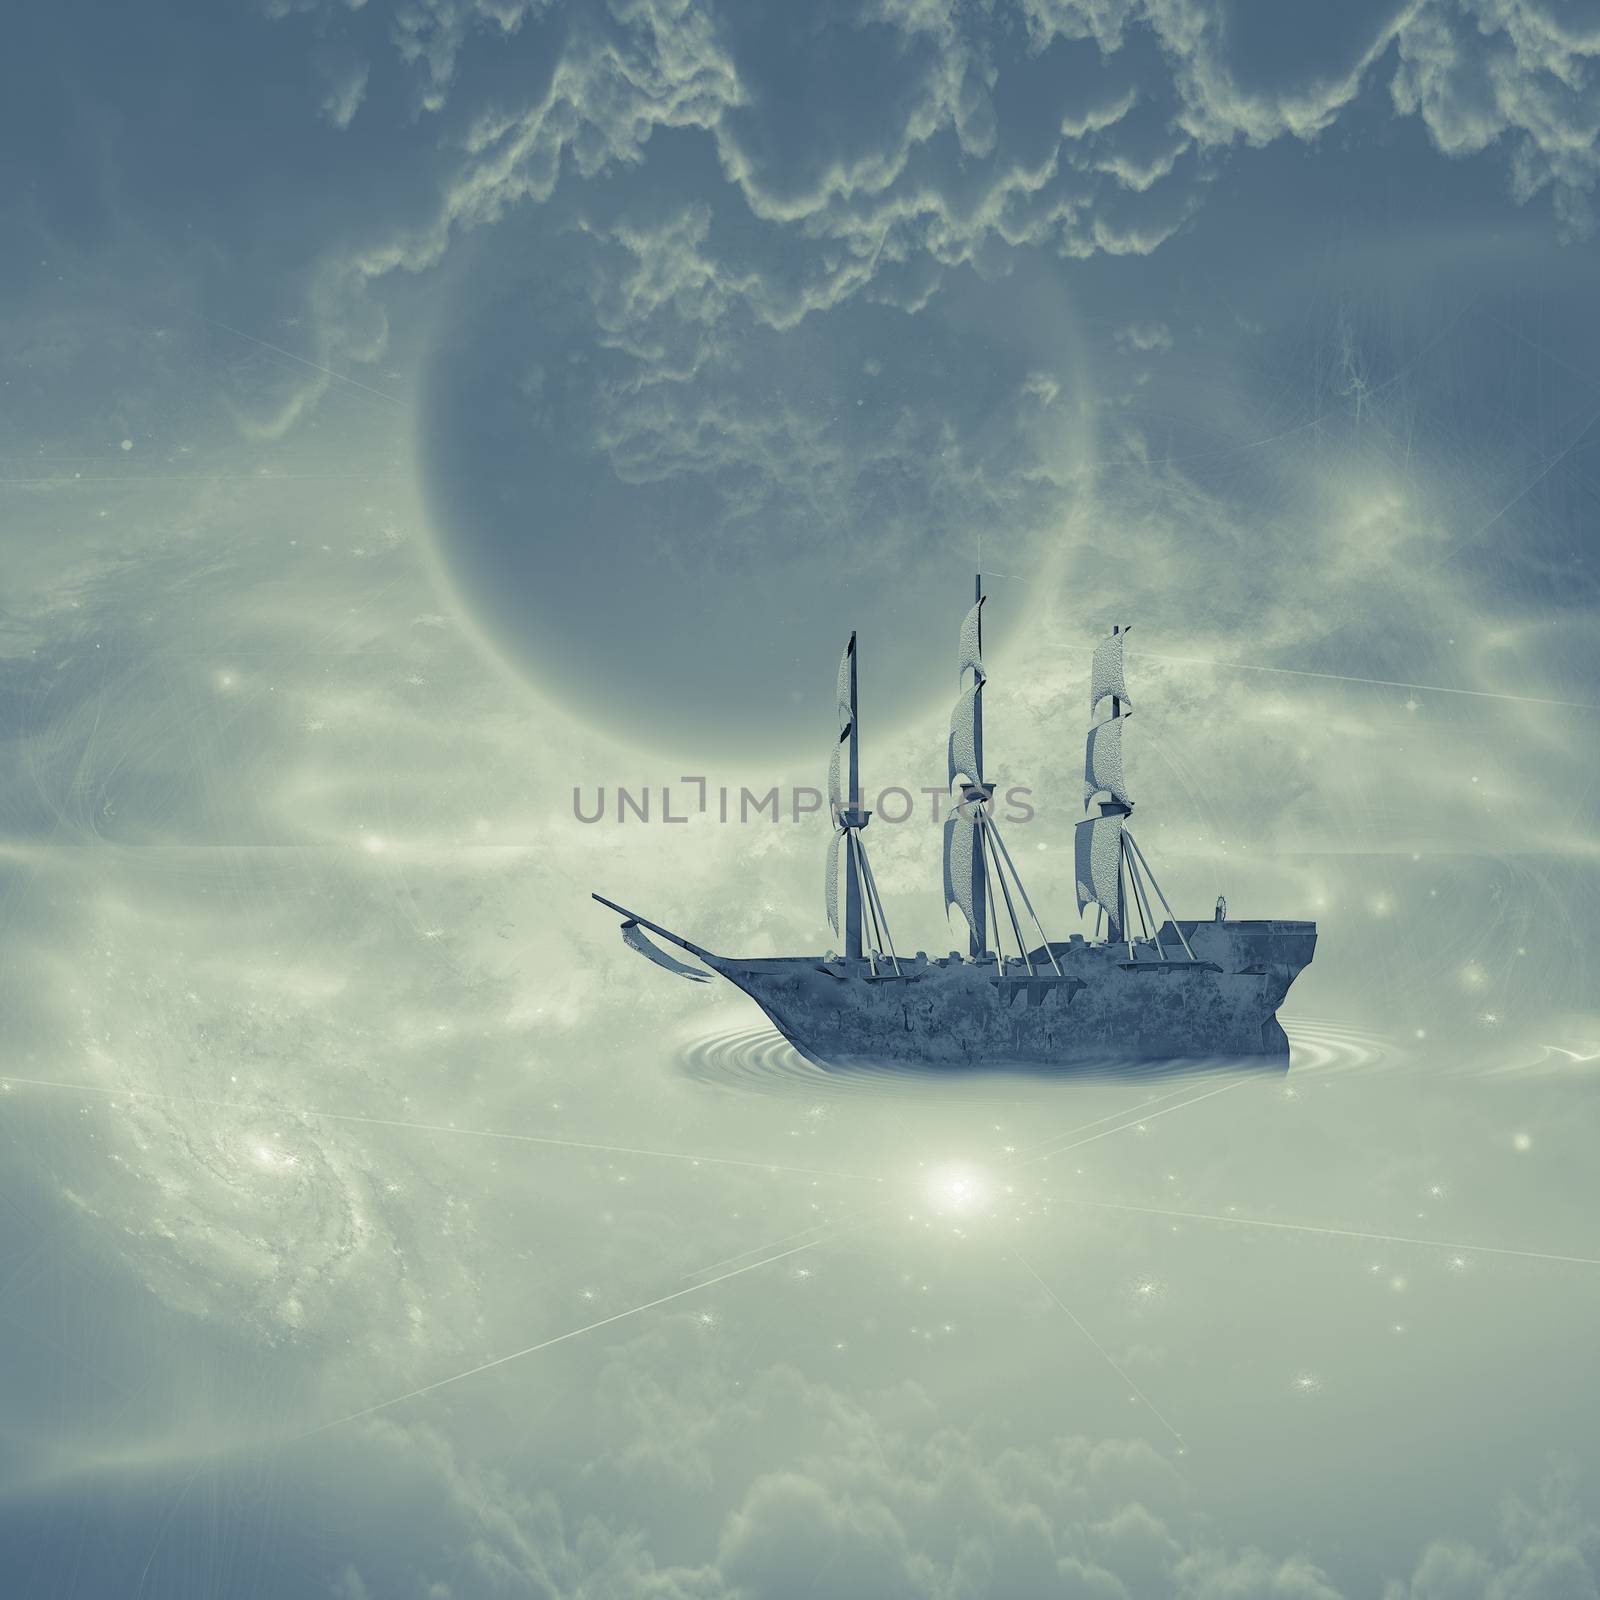 Sailing ship with full sails in fantastic sky scene